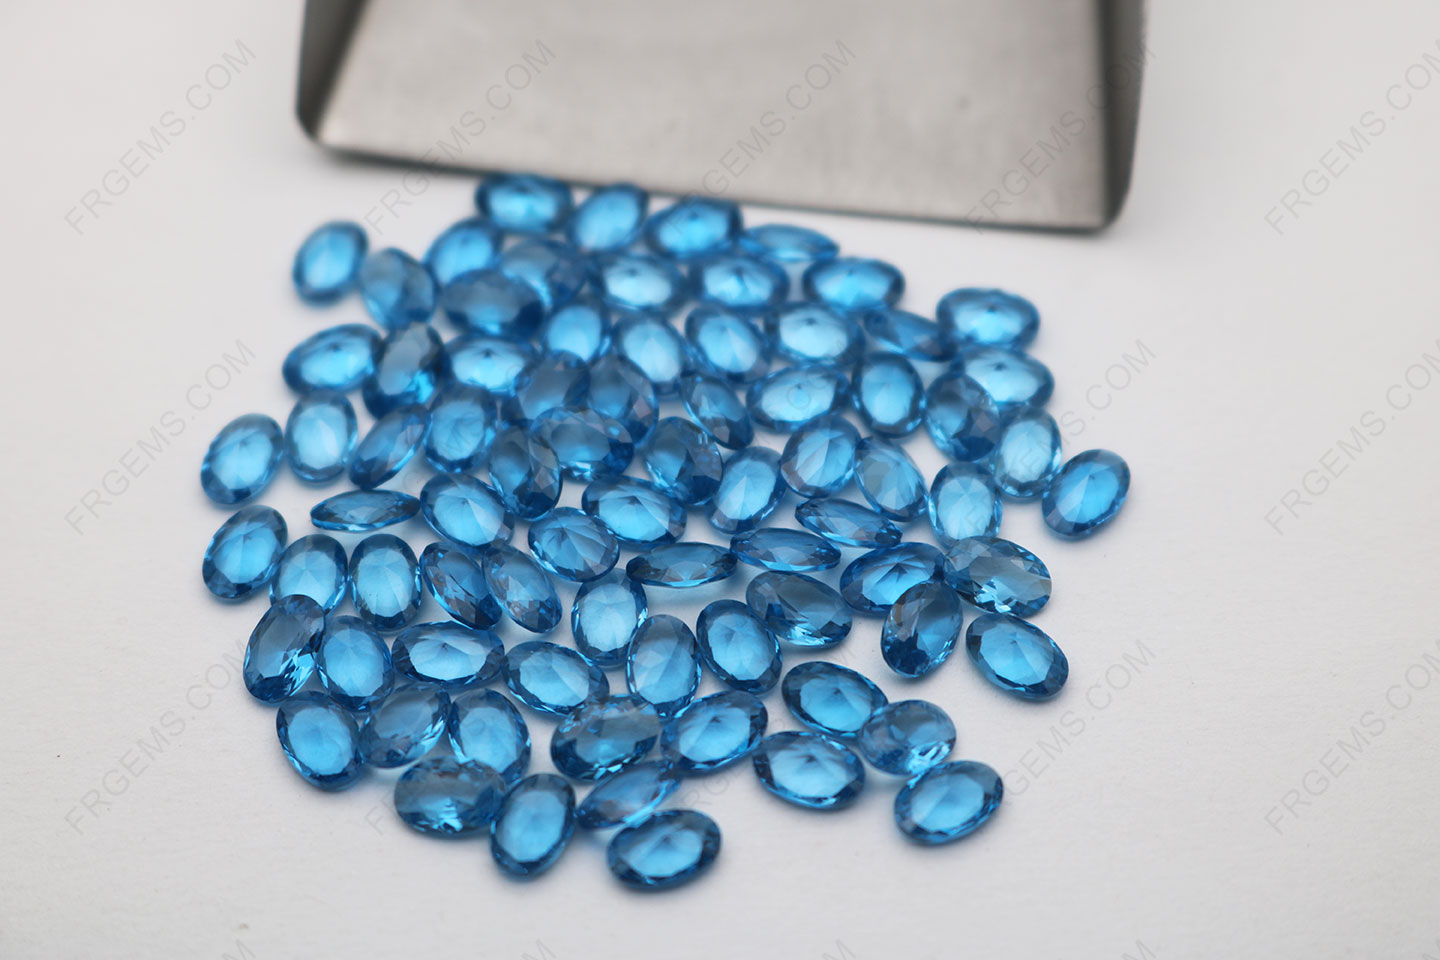 Loose Spinel Swiss blue 119# Color Oval shape Faceted cut 6x4mm gemstones Suppliers from China